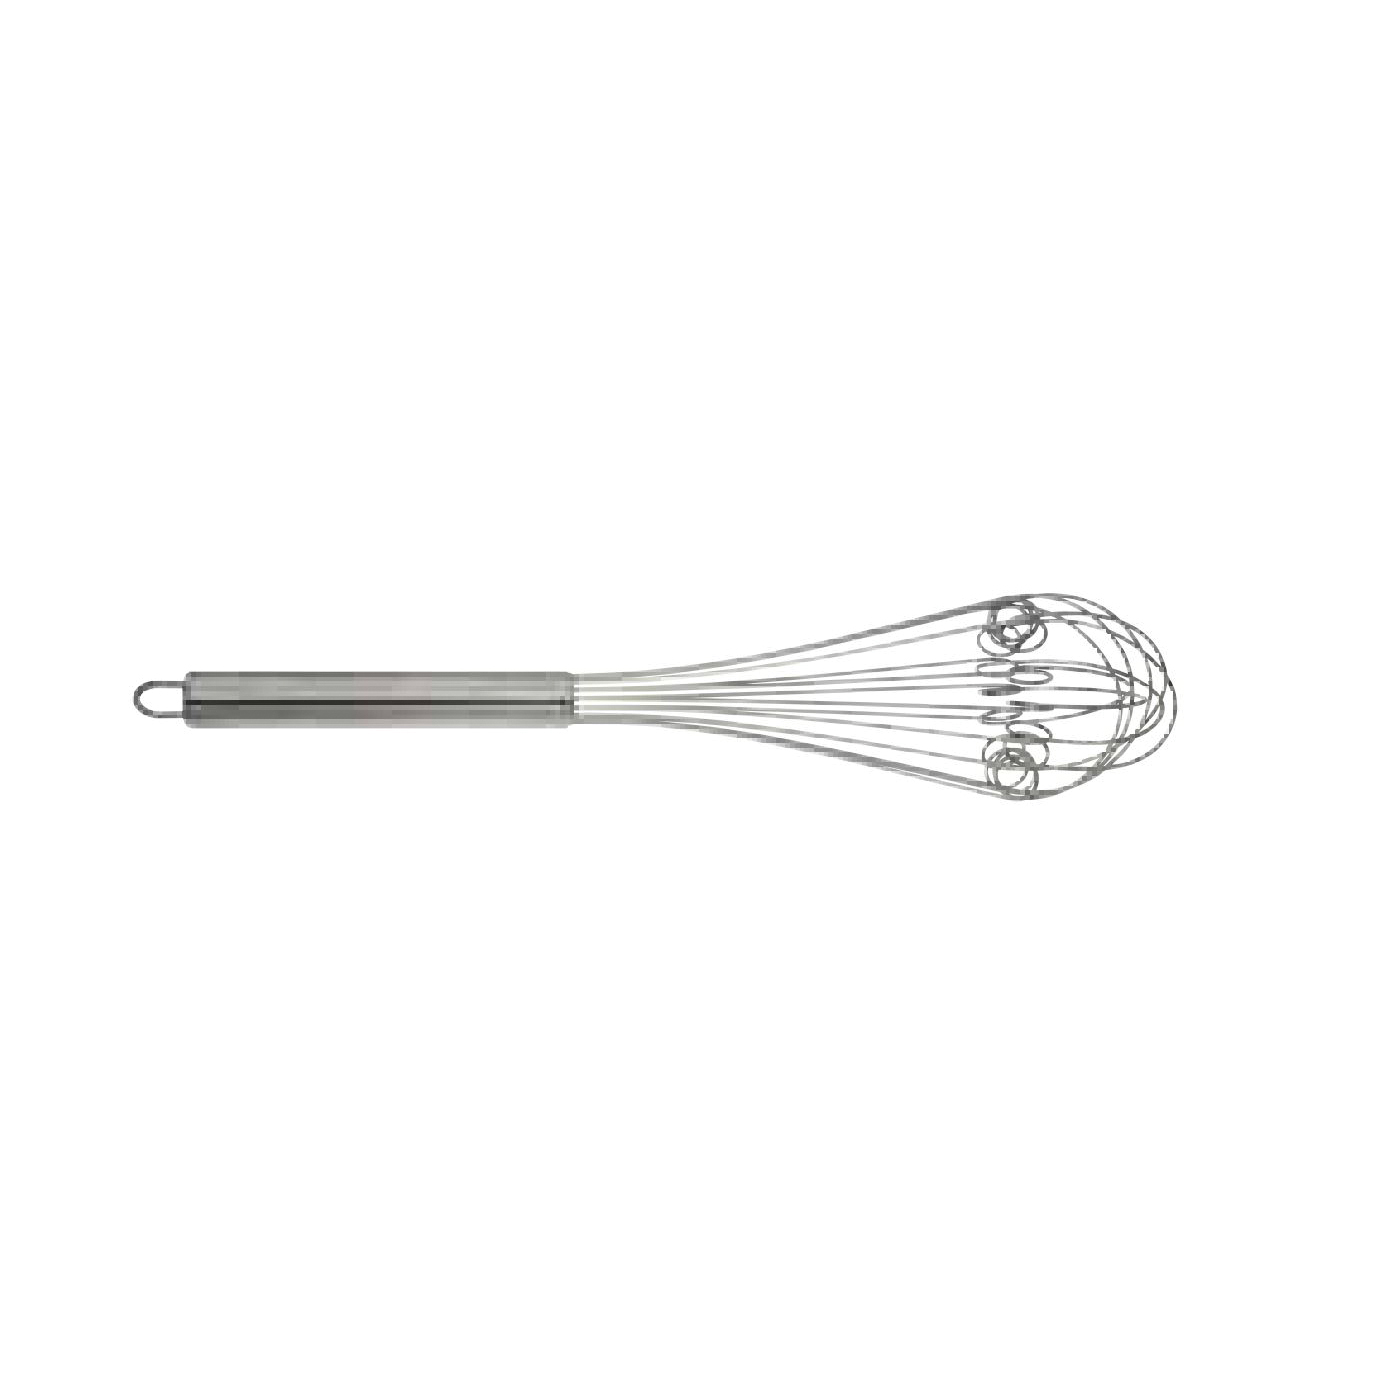 Linden Sweden Jonas 33181 Small Wire Whisk with Loops, 11 in OAL, Stainless Steel, Stainless Steel Handle - 1